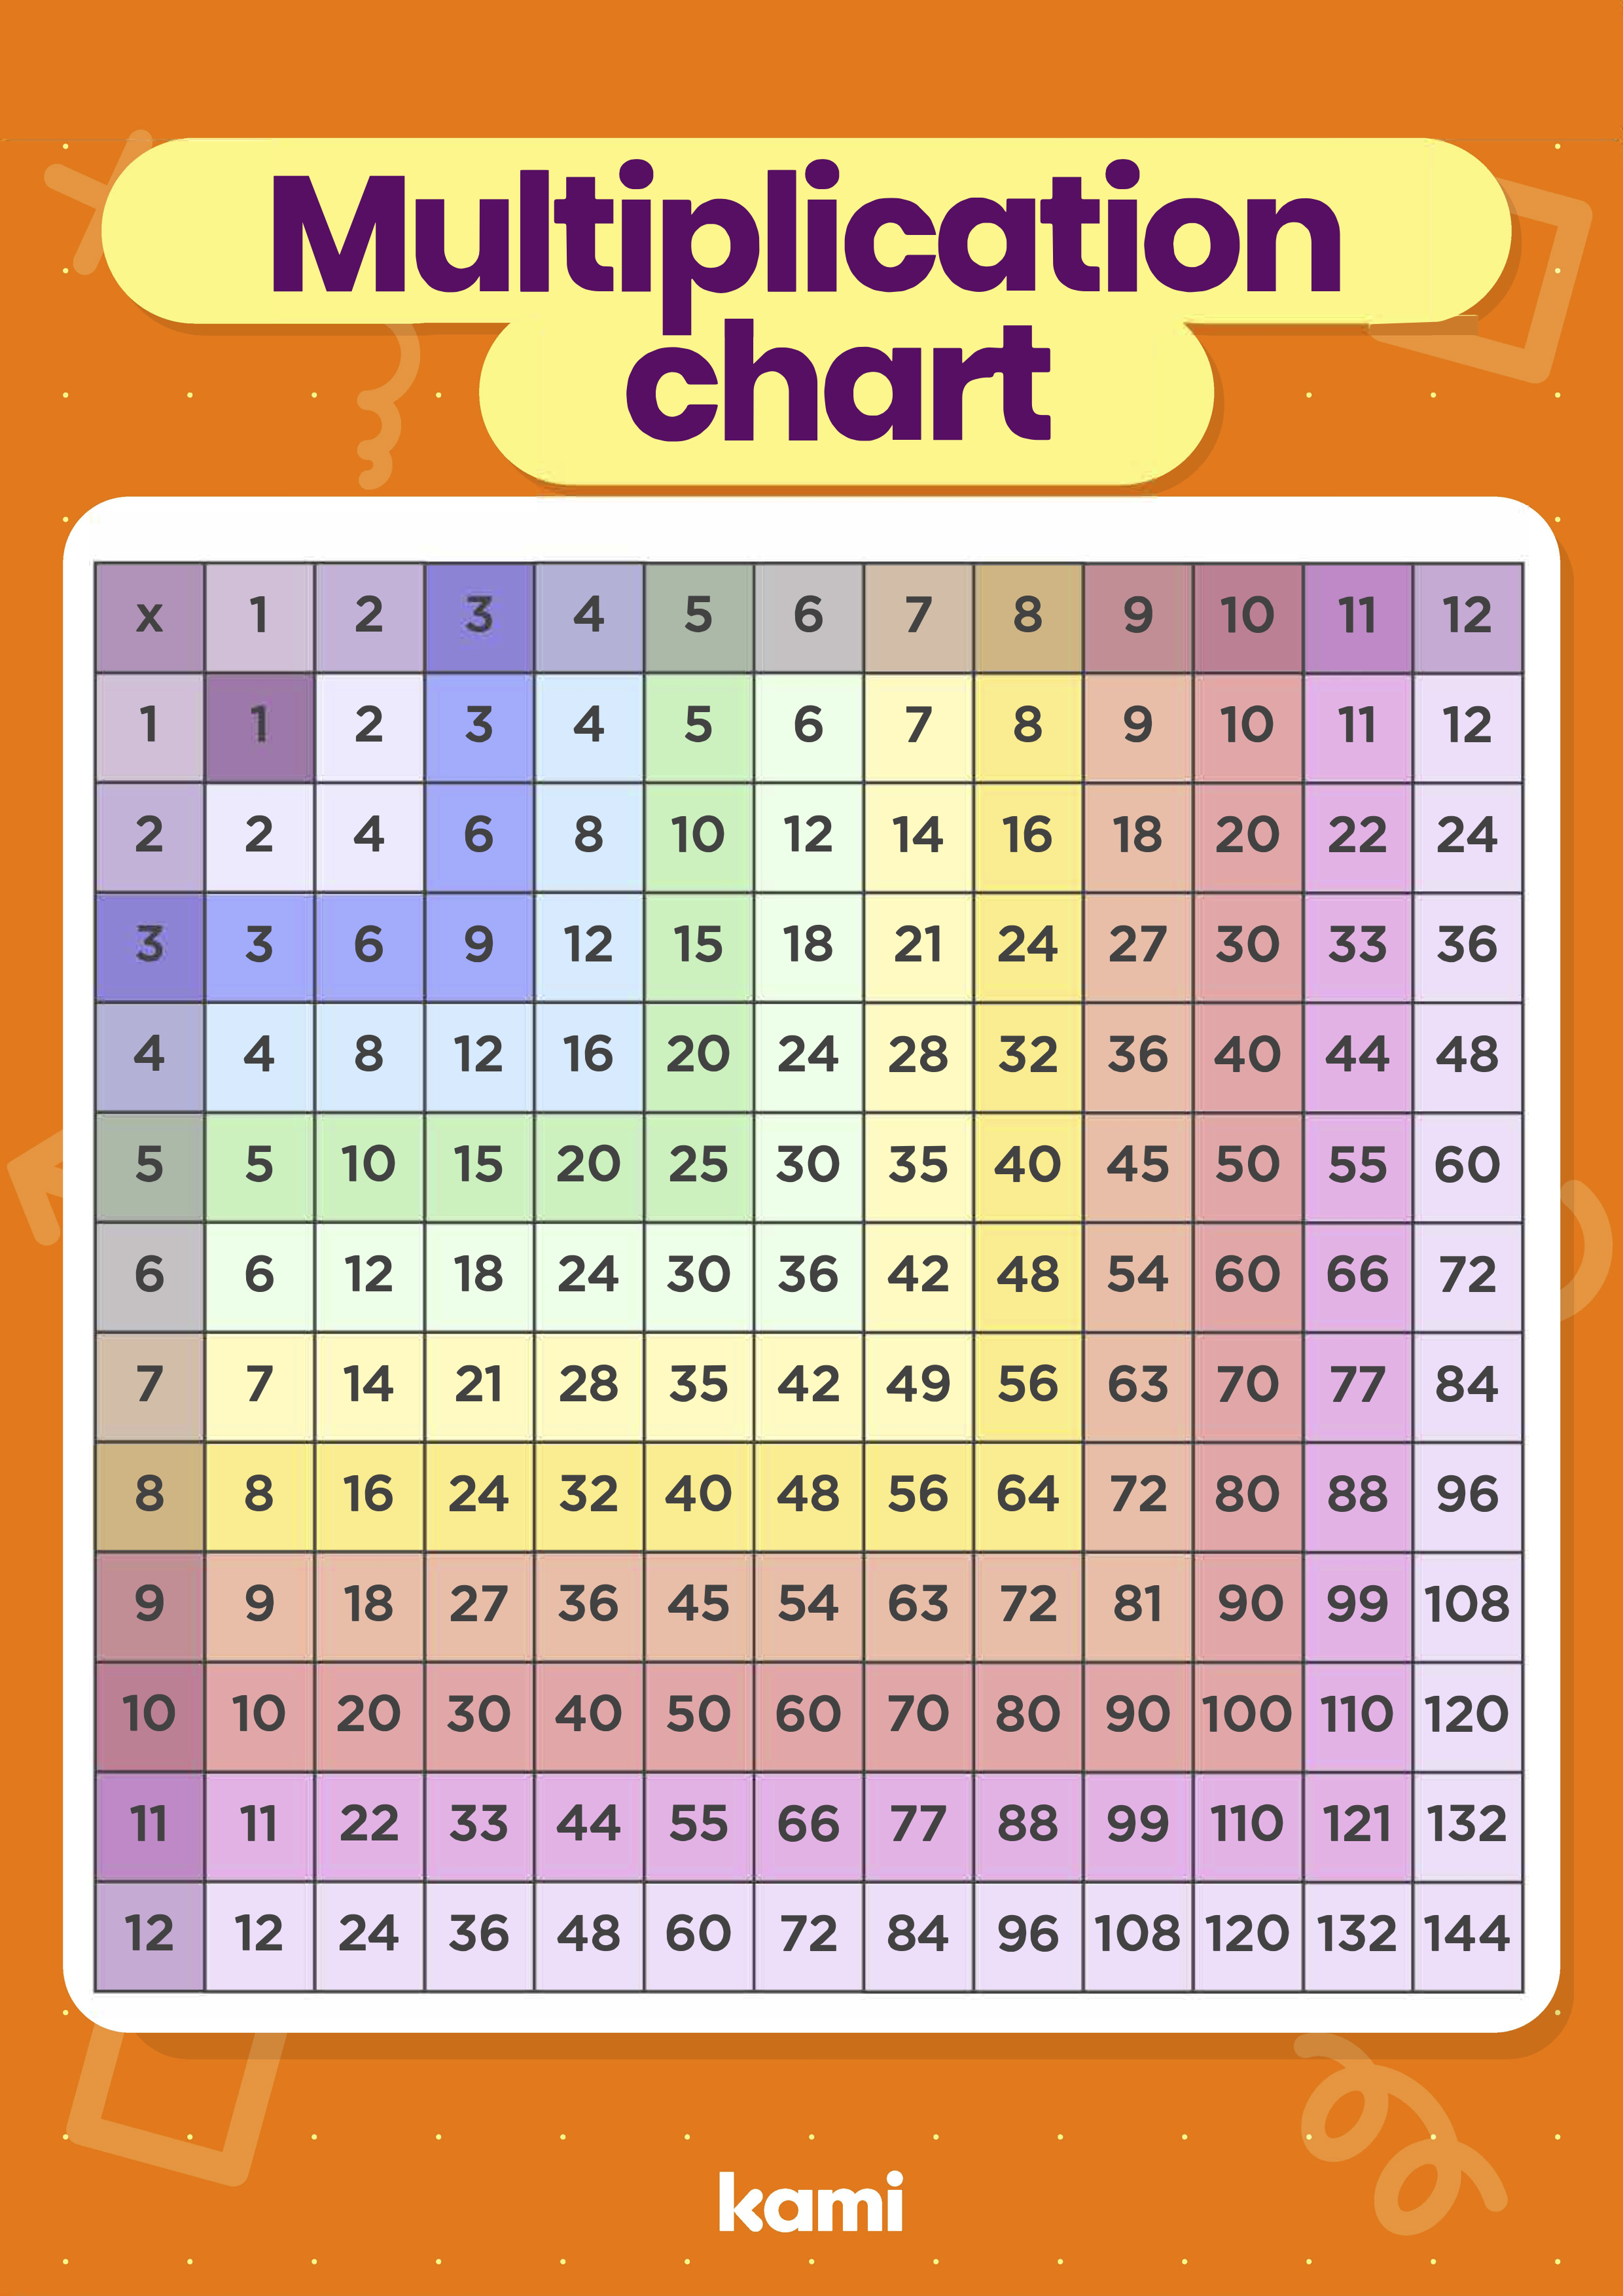 Multiplication Chart Example